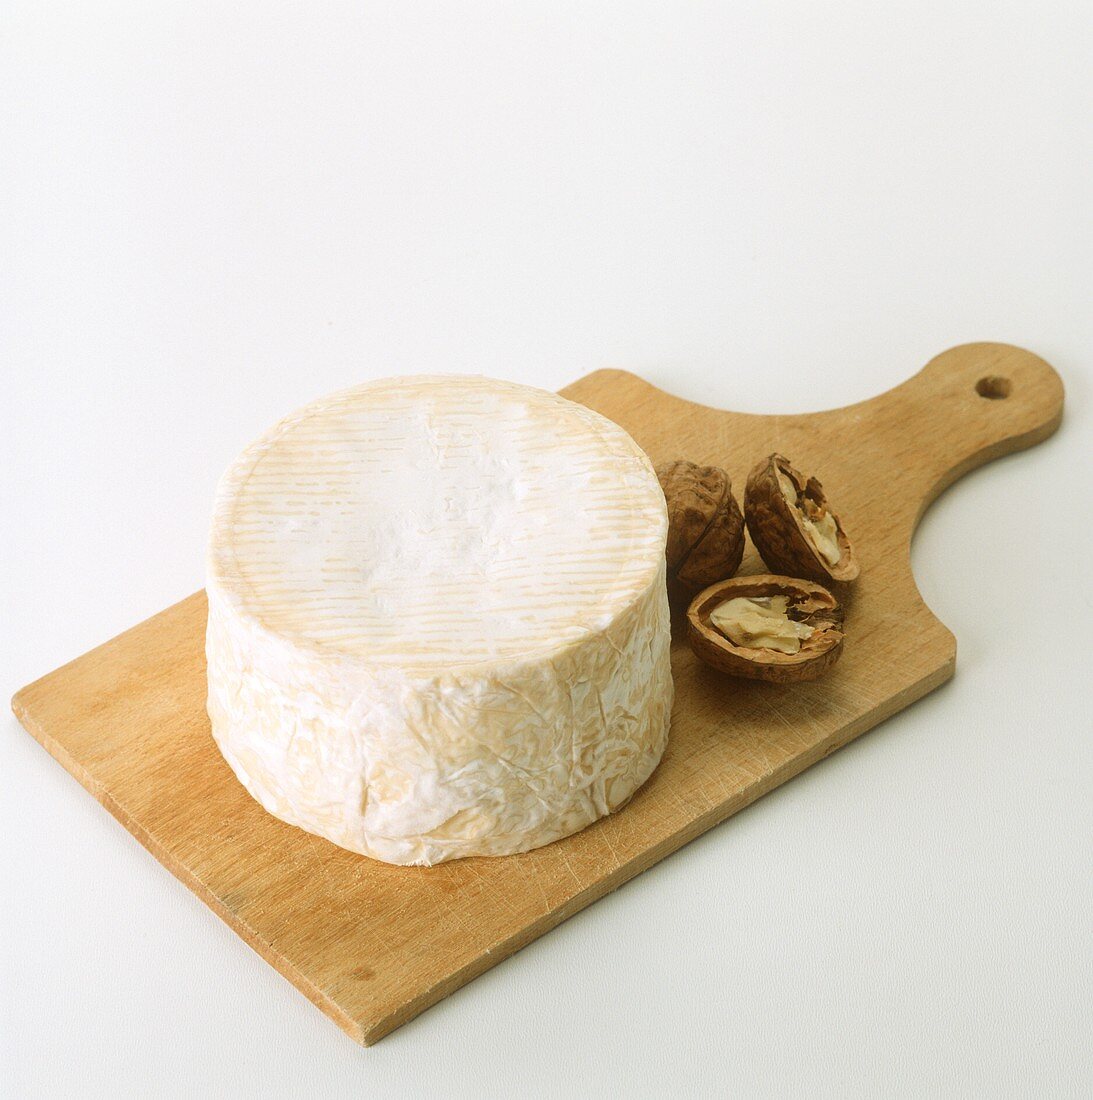 Chaource (soft cheese from Champagne, France)